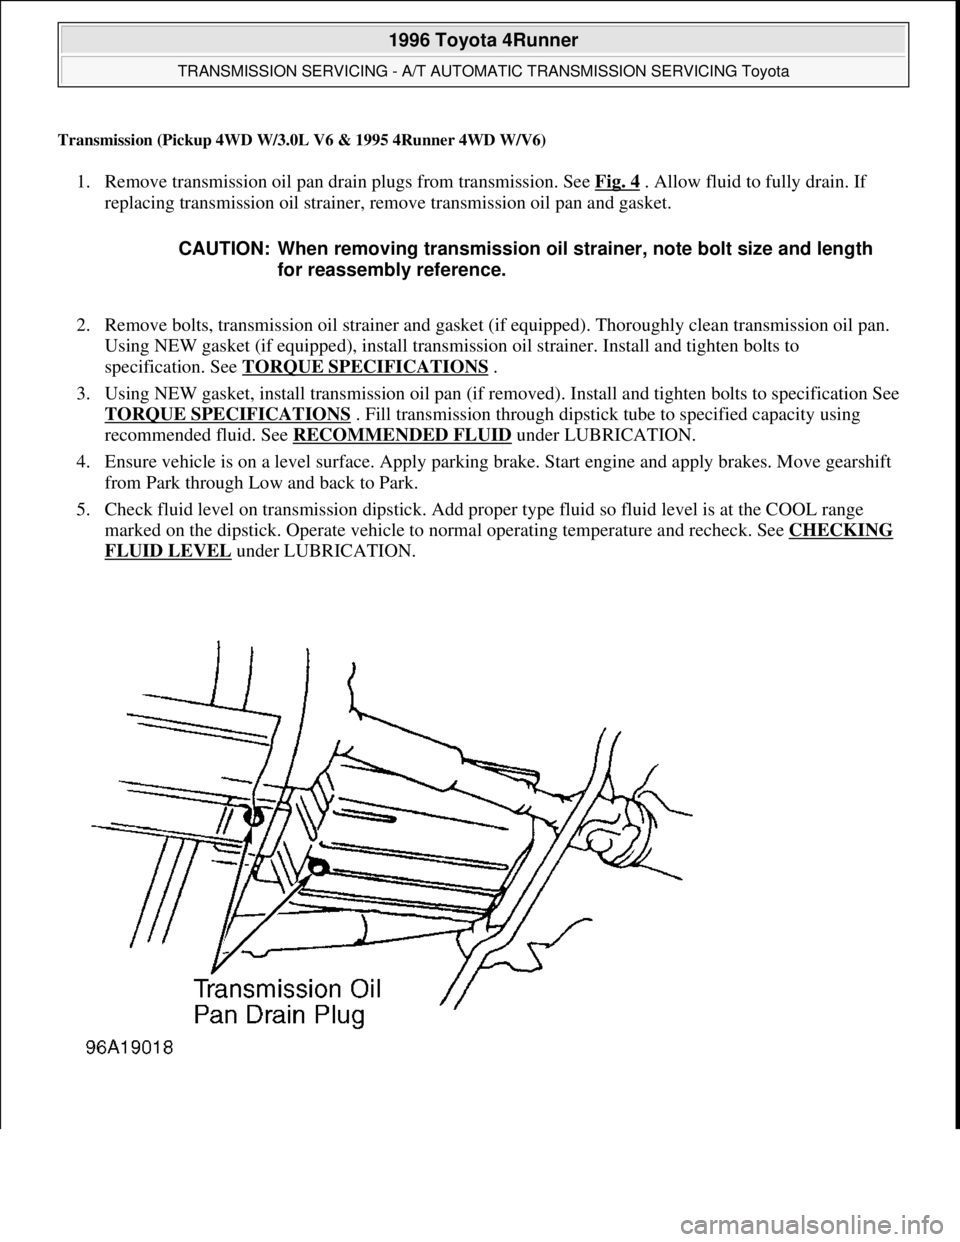 TOYOTA RAV4 1996  Service Repair Manual Transmission (Pickup 4WD W/3.0L V6 & 1995 4Runner 4WD W/V6)
1. Remove transmission oil pan drain plugs from transmission. See Fig. 4 . Allow fluid to fully drain. If 
replacing transmission oil strain